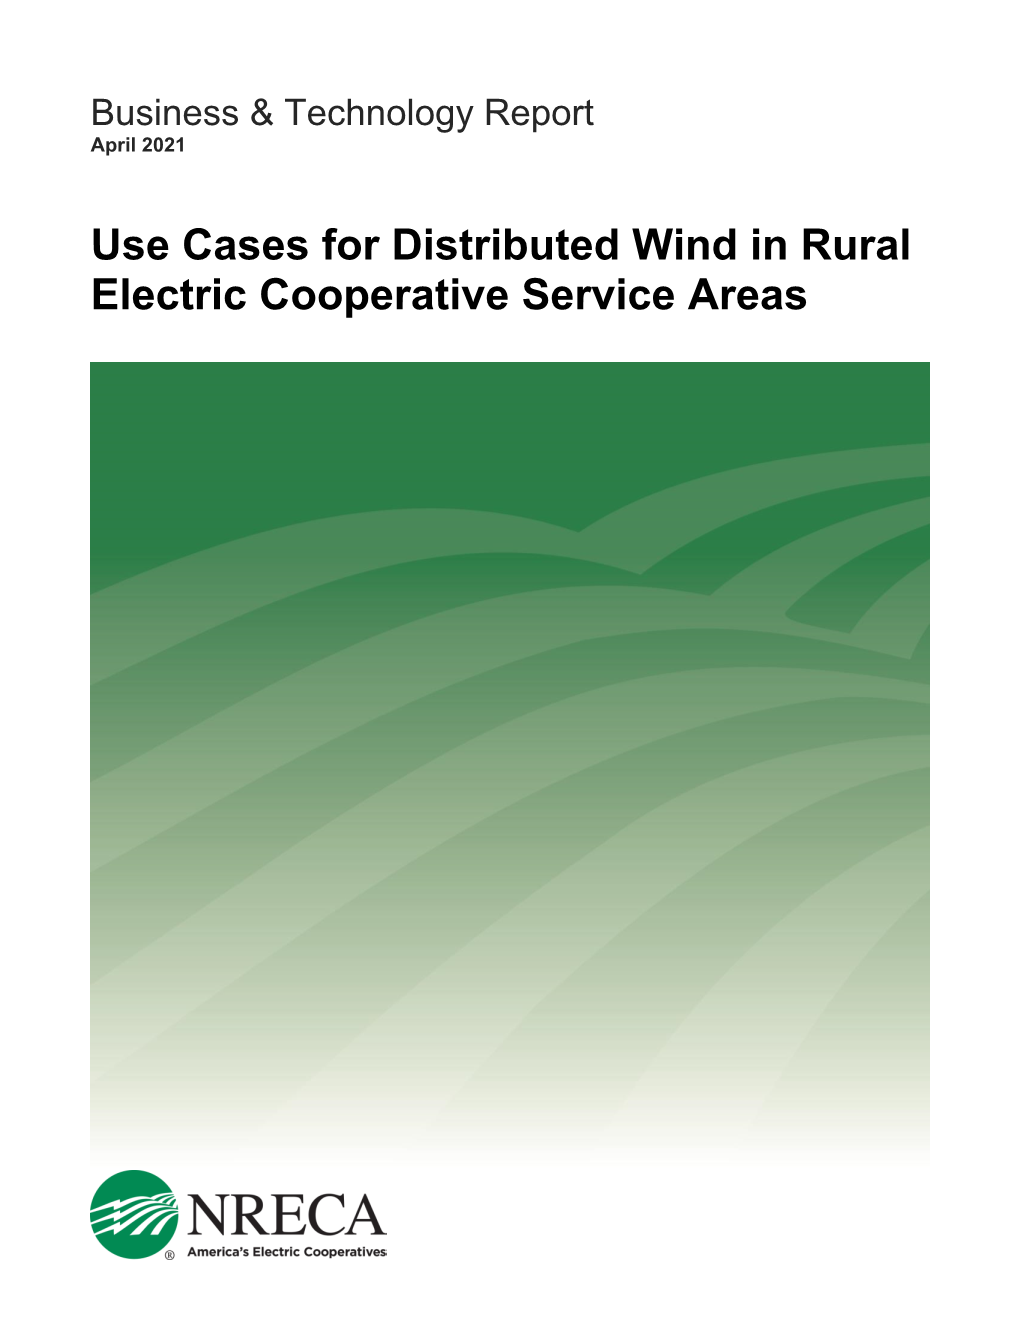 Use Cases for Distributed Wind in Rural Electric Cooperative Service Areas